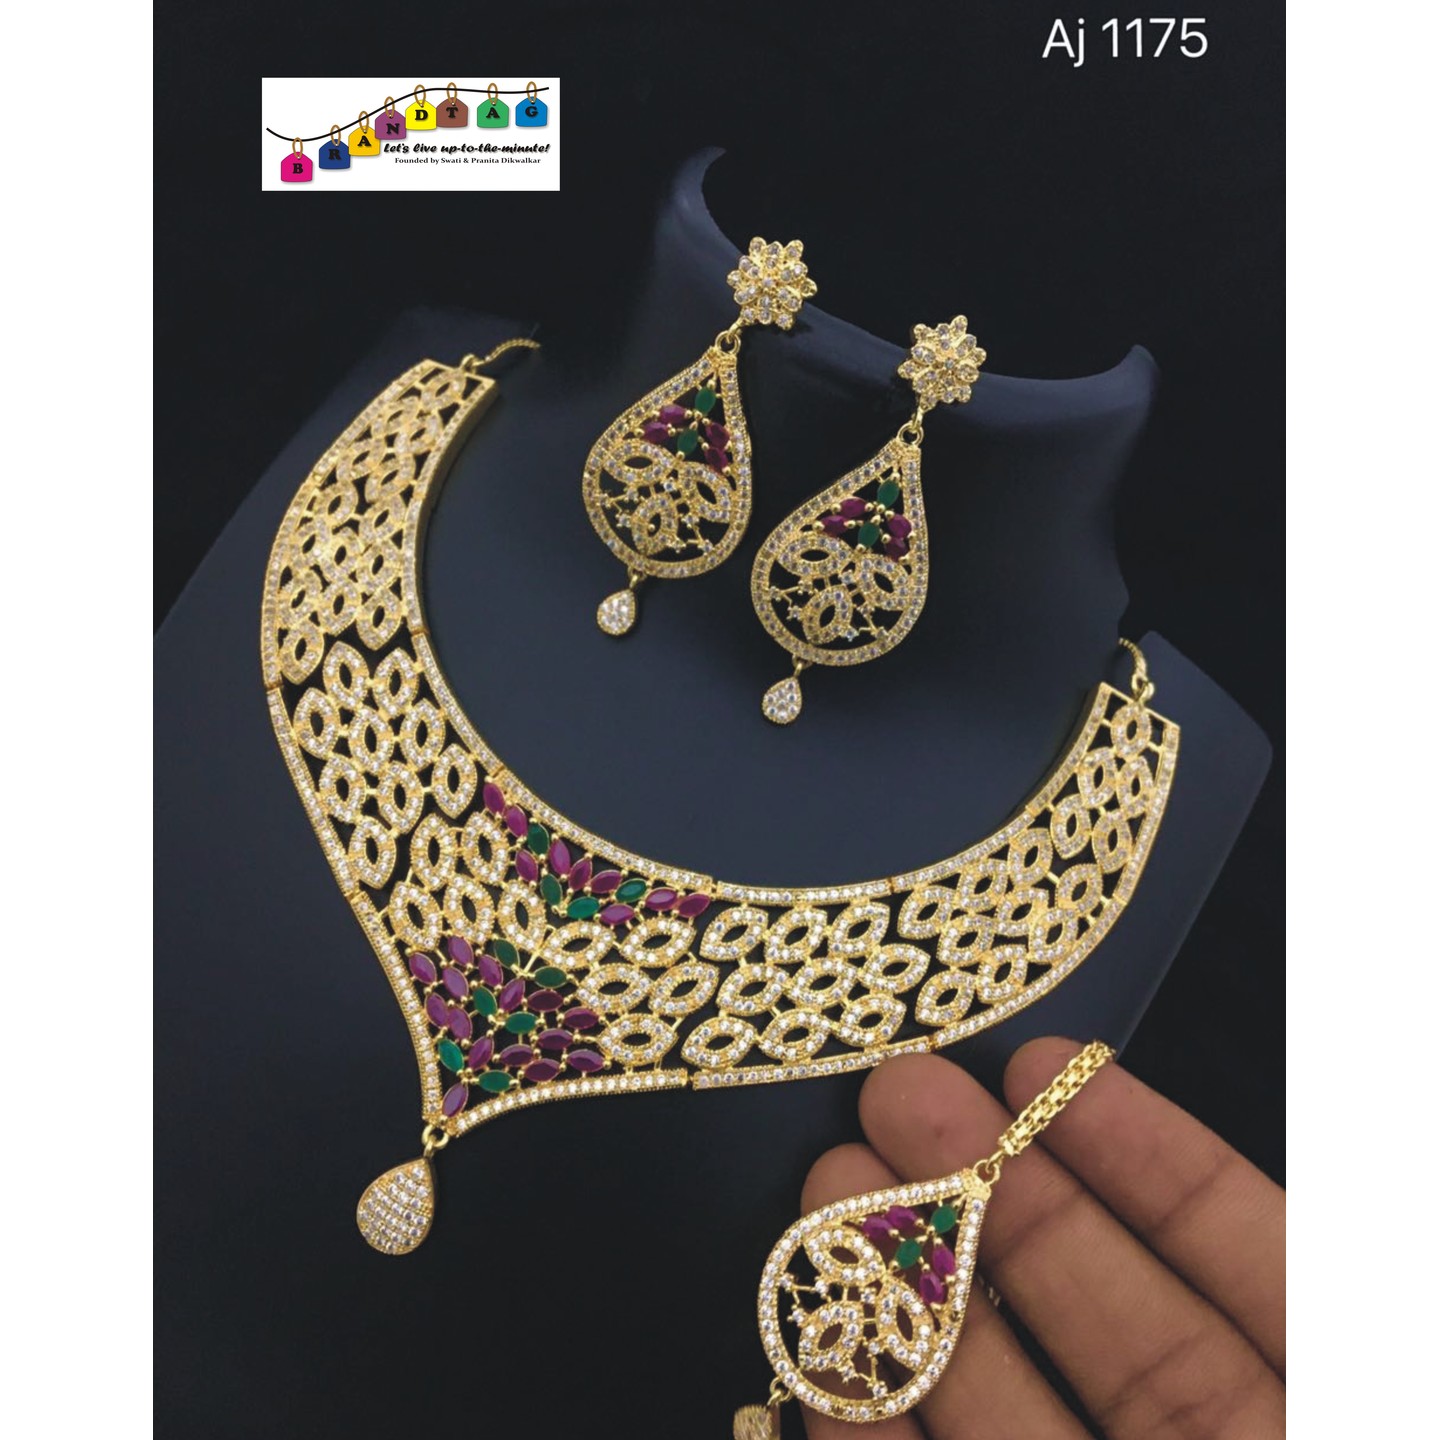 Special Teej Collection Of Necklace sets!!